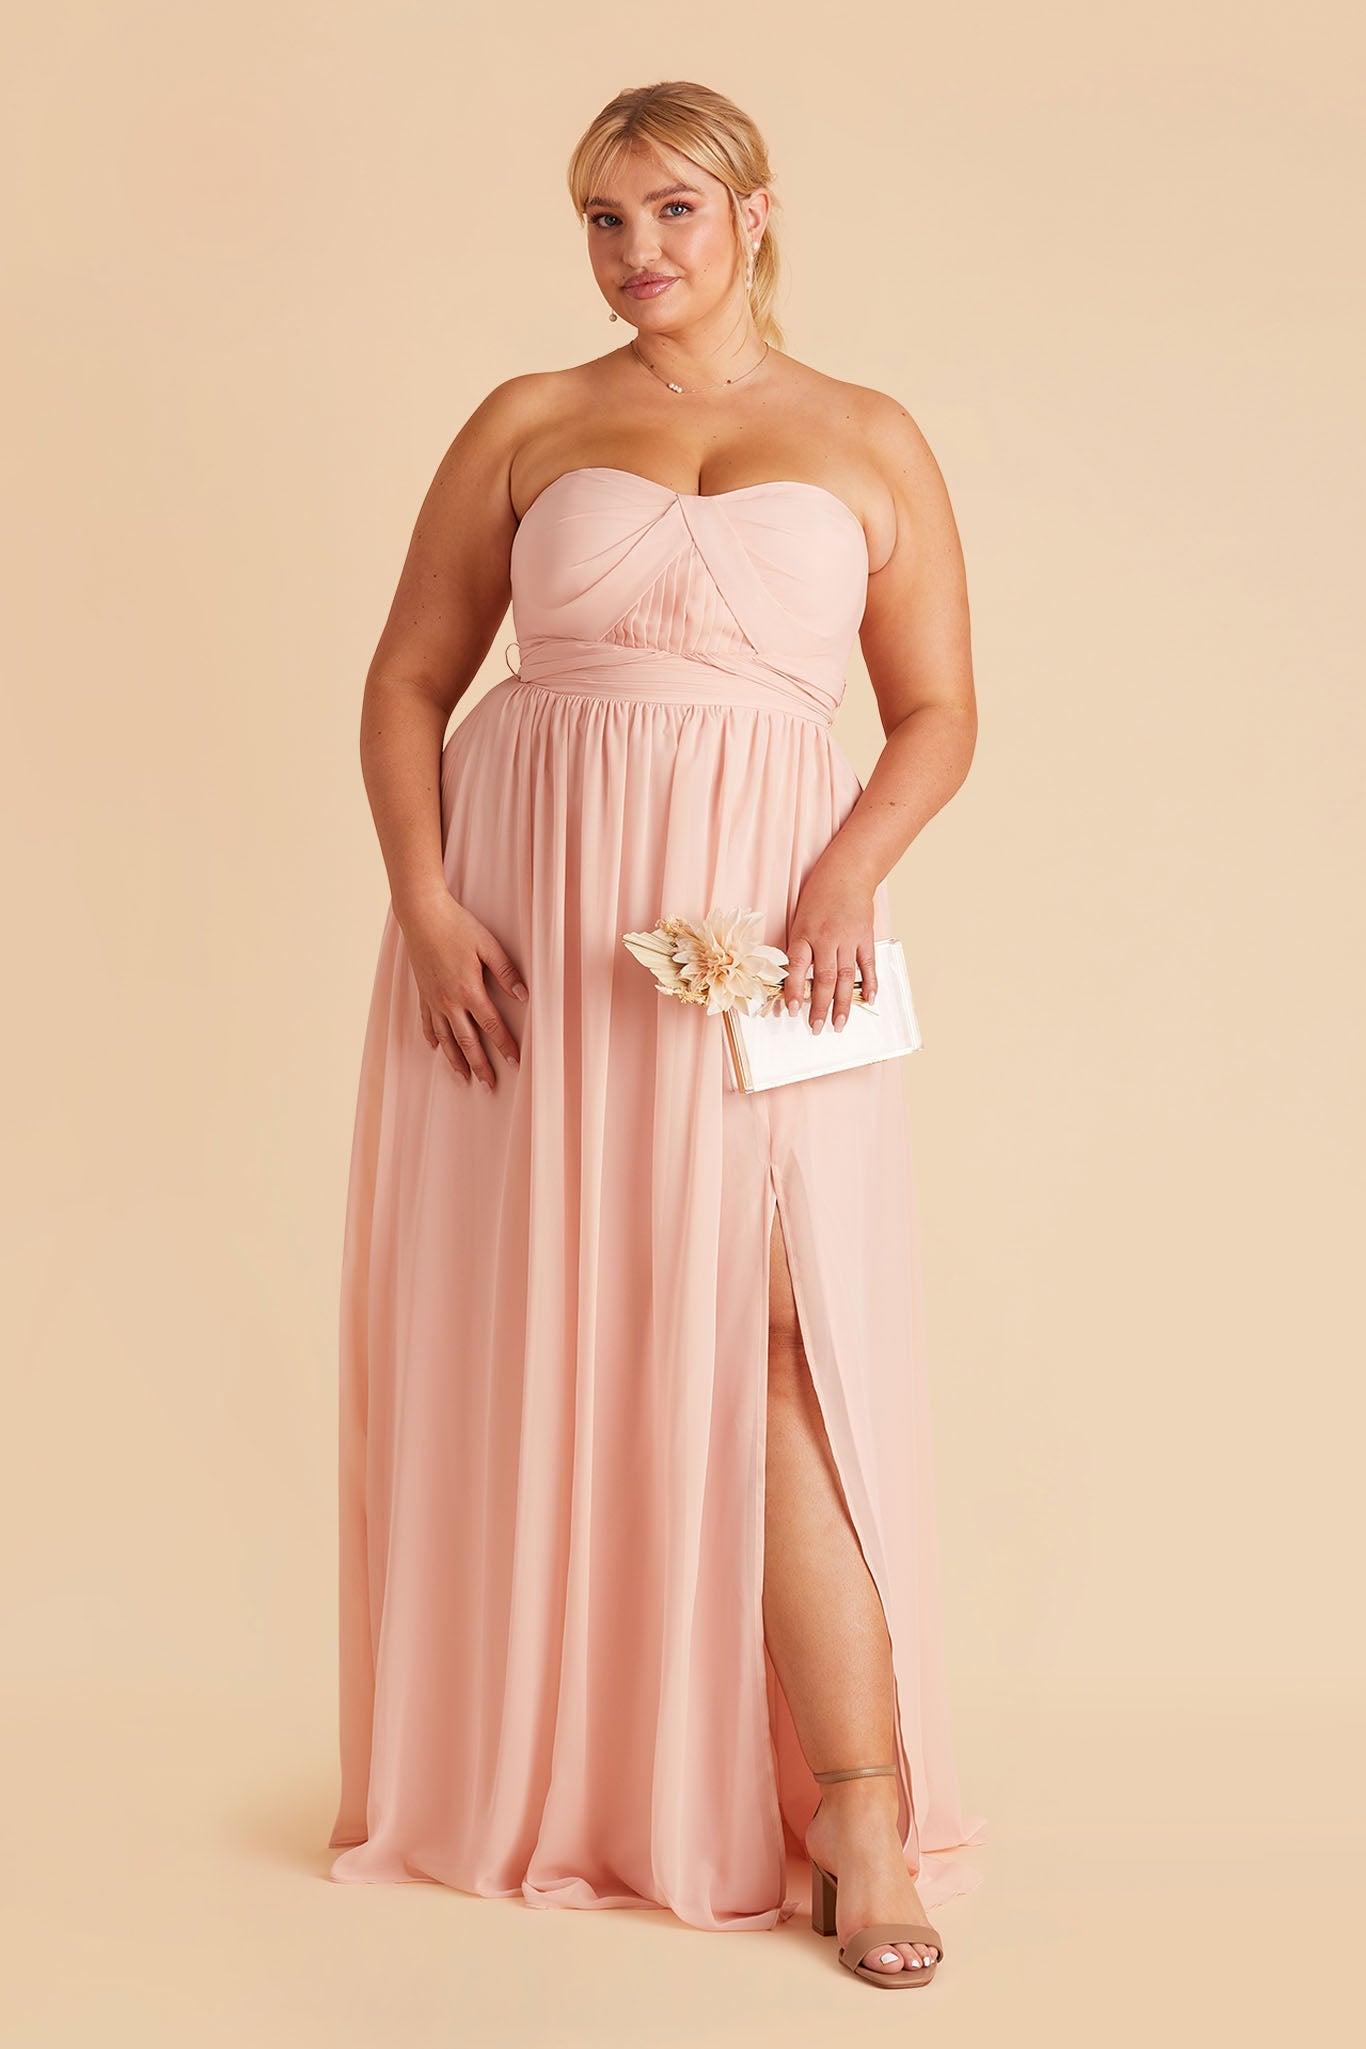 Grace plus size convertible bridesmaid dress in Blush Pink Chiffon by Birdy Grey, front view